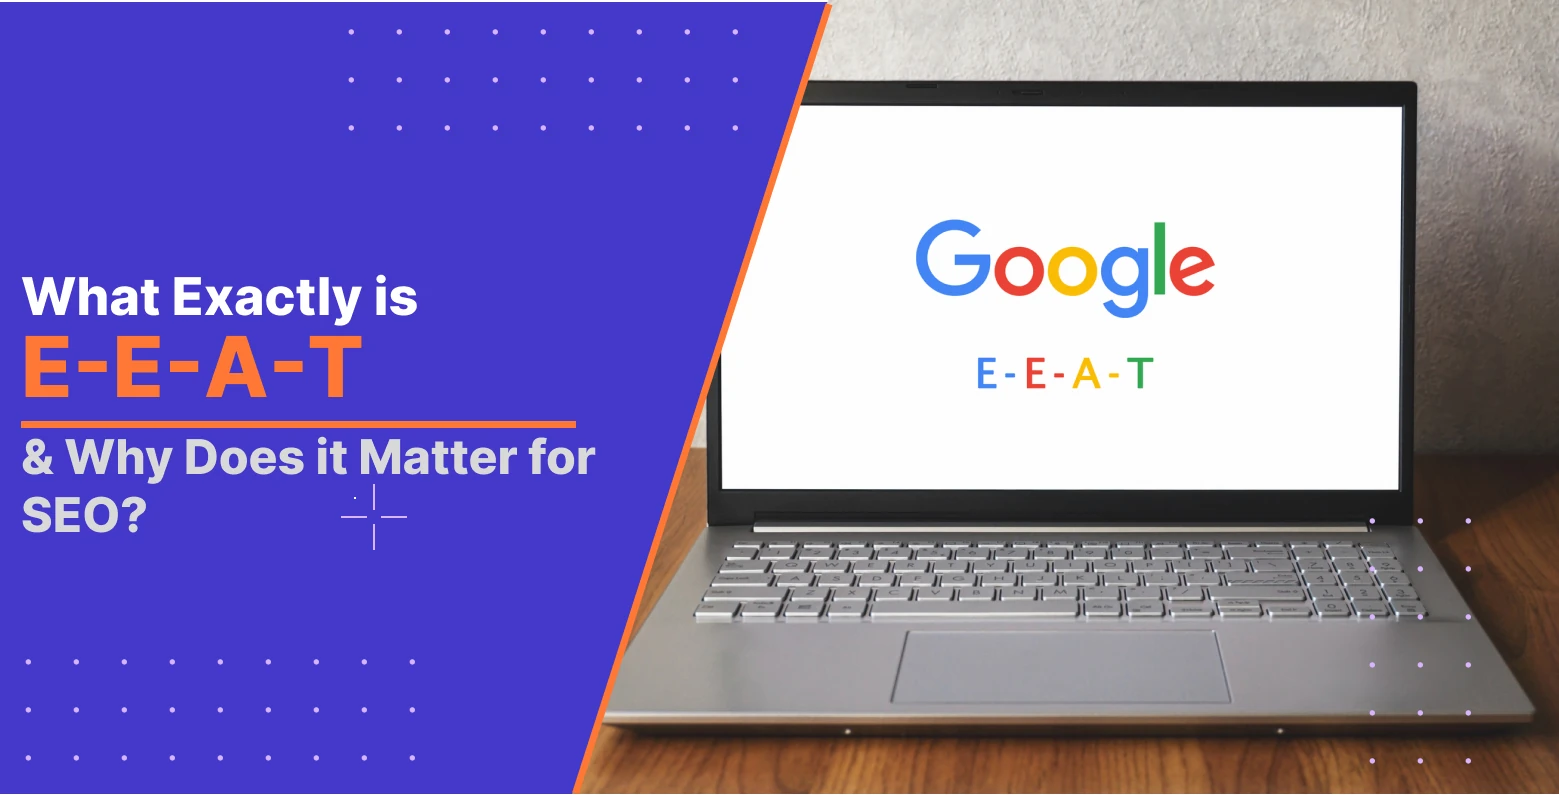 What exactly is E-E-A-T, and why does it matter for SEO?